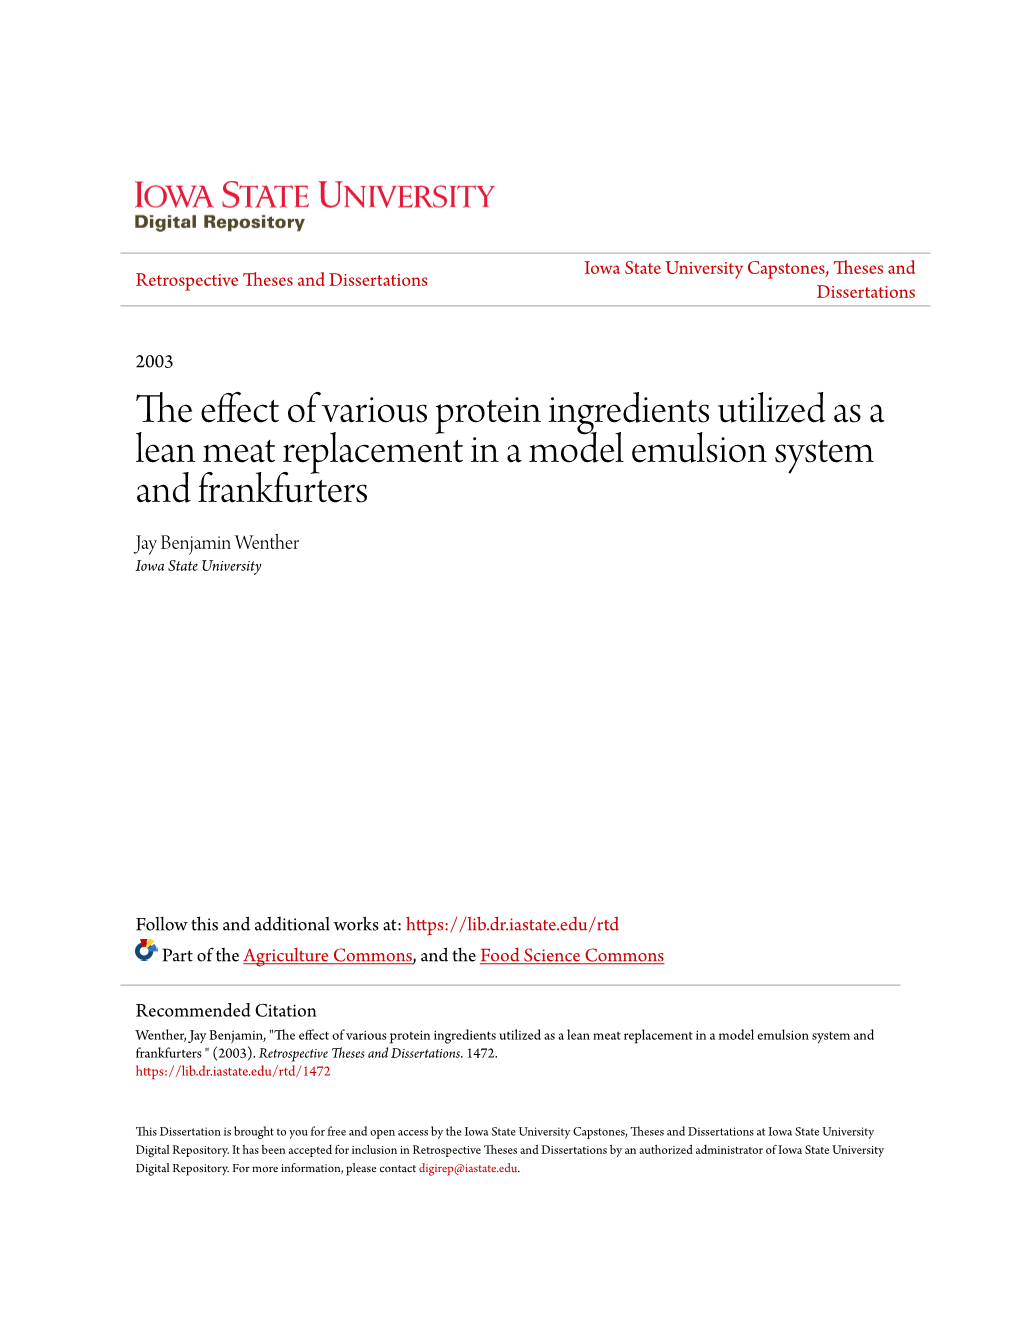 The Effect of Various Protein Ingredients Utilized As a Lean Meat Replacement in a Model Emulsion System and Frankfurters Jay Benjamin Wenther Iowa State University